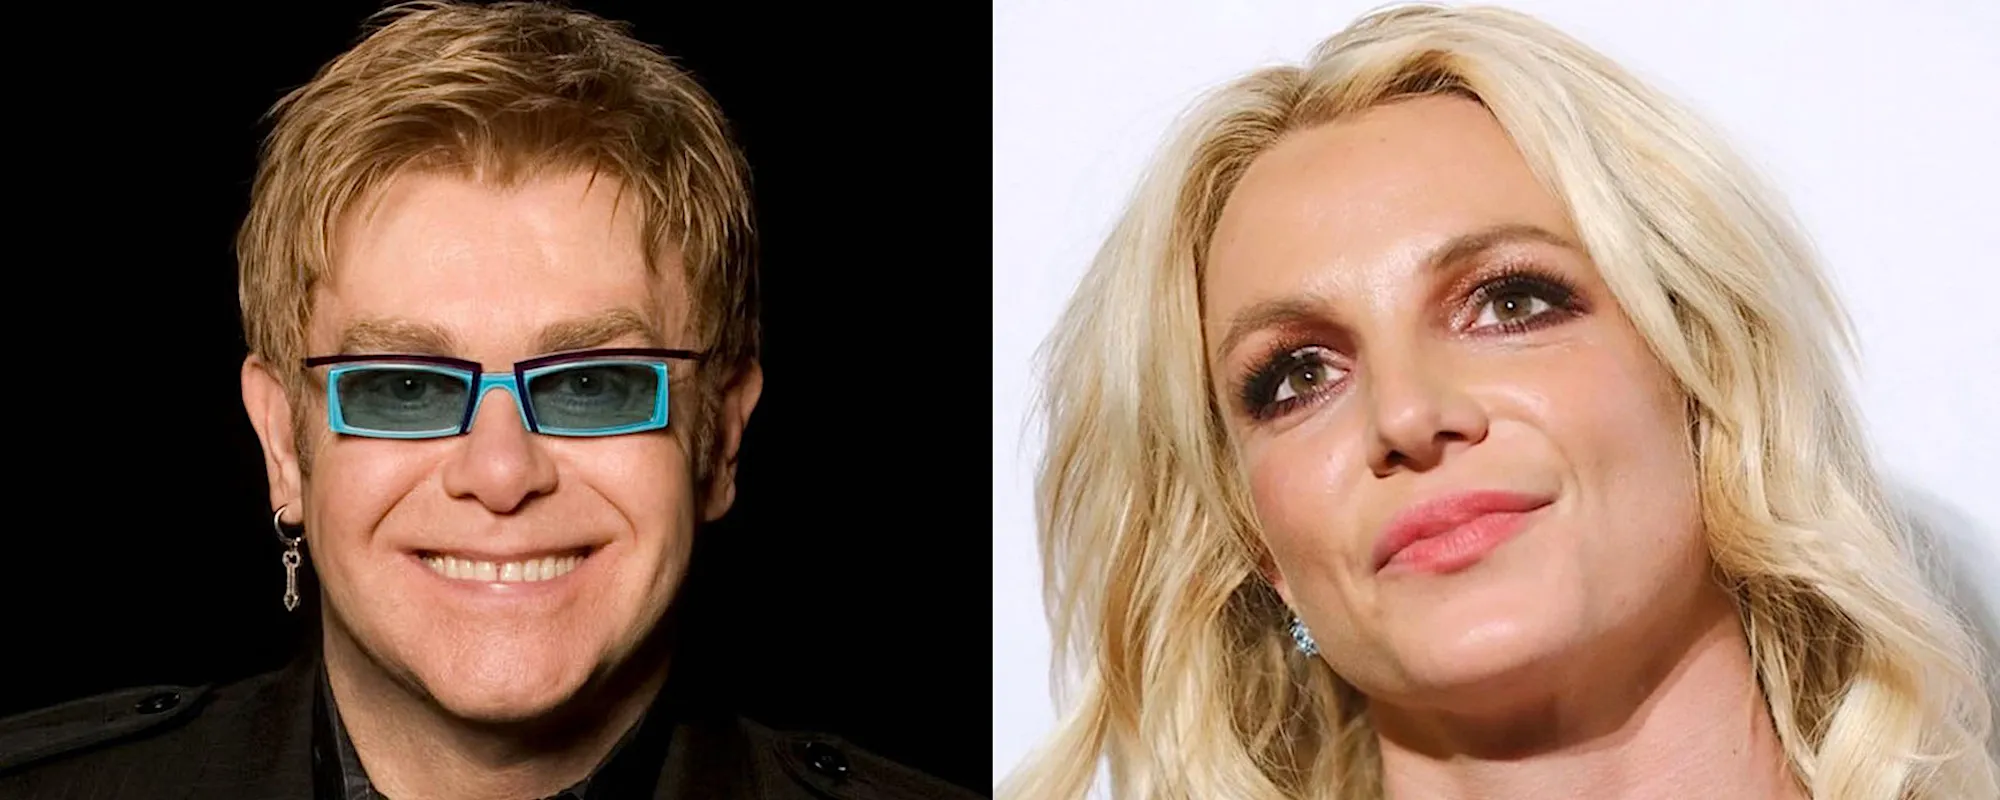 Elton John Shares First Snippet of Britney Spears Collab “Hold Me Closer”